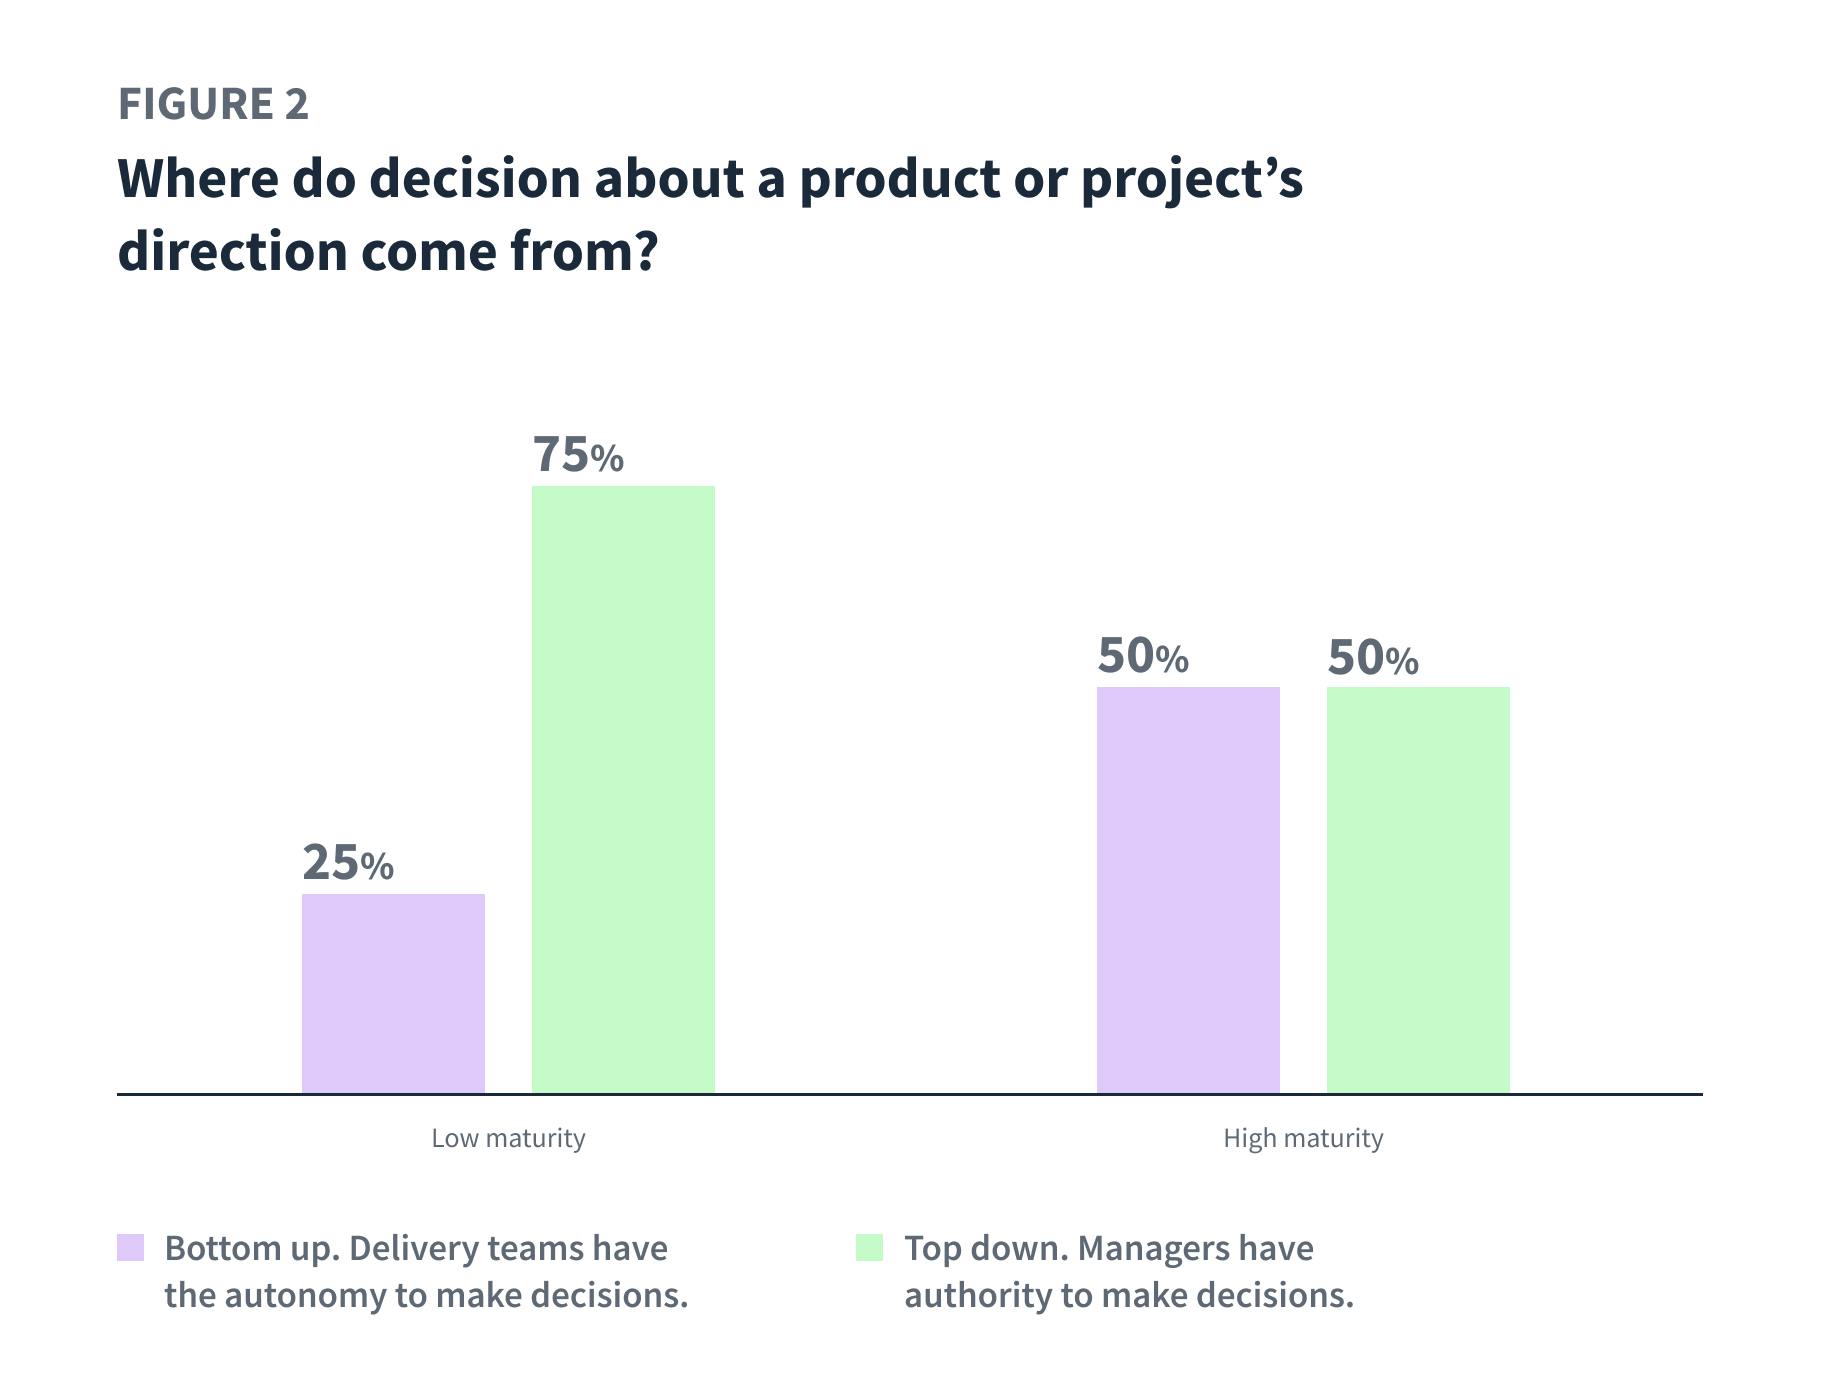 Figure 2: Where do decisions about a product or project's direction come from? Low maturity: 25% come from delivery teams, 75% come from managers. High maturity: 50% come from delivery teams, 50% come from managers.